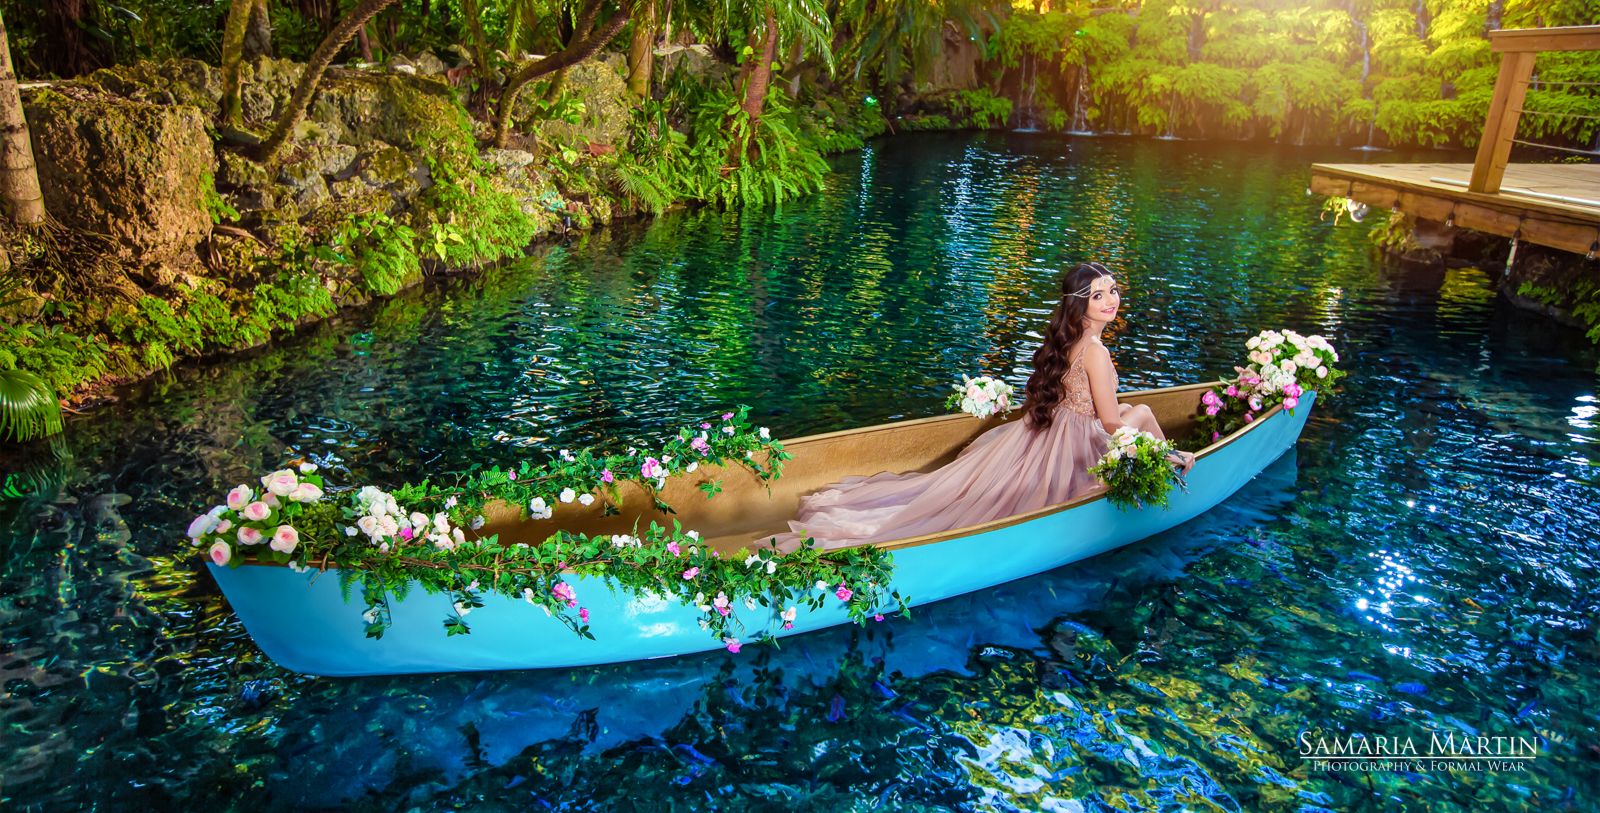 Quinceanera with flowers, quinceanera photoshoot in a lake, 15 photoshoot with flowers, best Miami photographer, Samaria Martin Photography 2